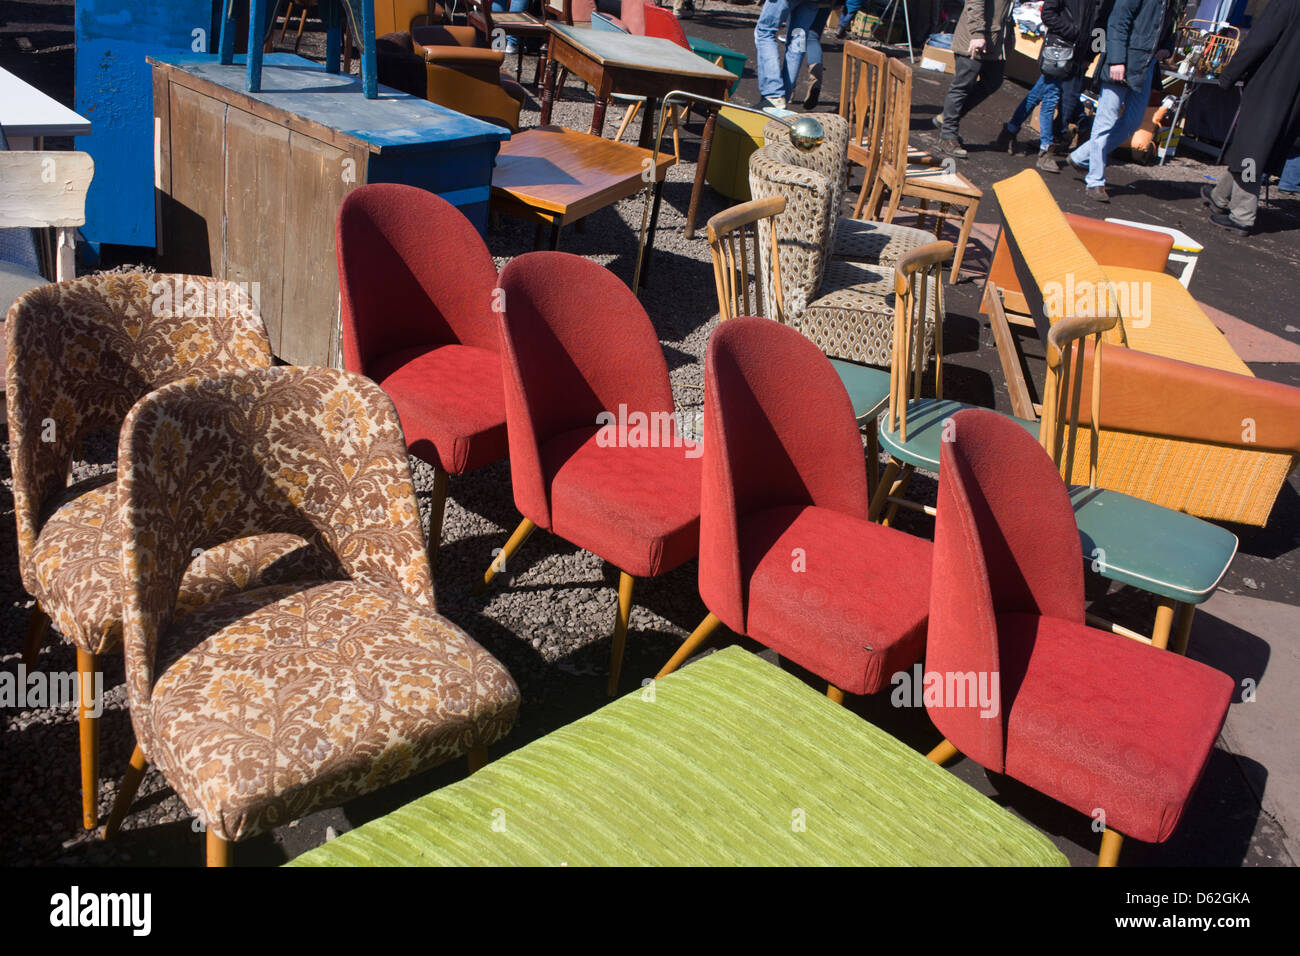 1950s-era chairs and assorted furniture, bric-a-brac and old possessions being sold at a giant market in Mauerpark - an open space on the site of the old Berlin wall, the former border between Communist East and West Berlin during the Cold War. Stock Photo